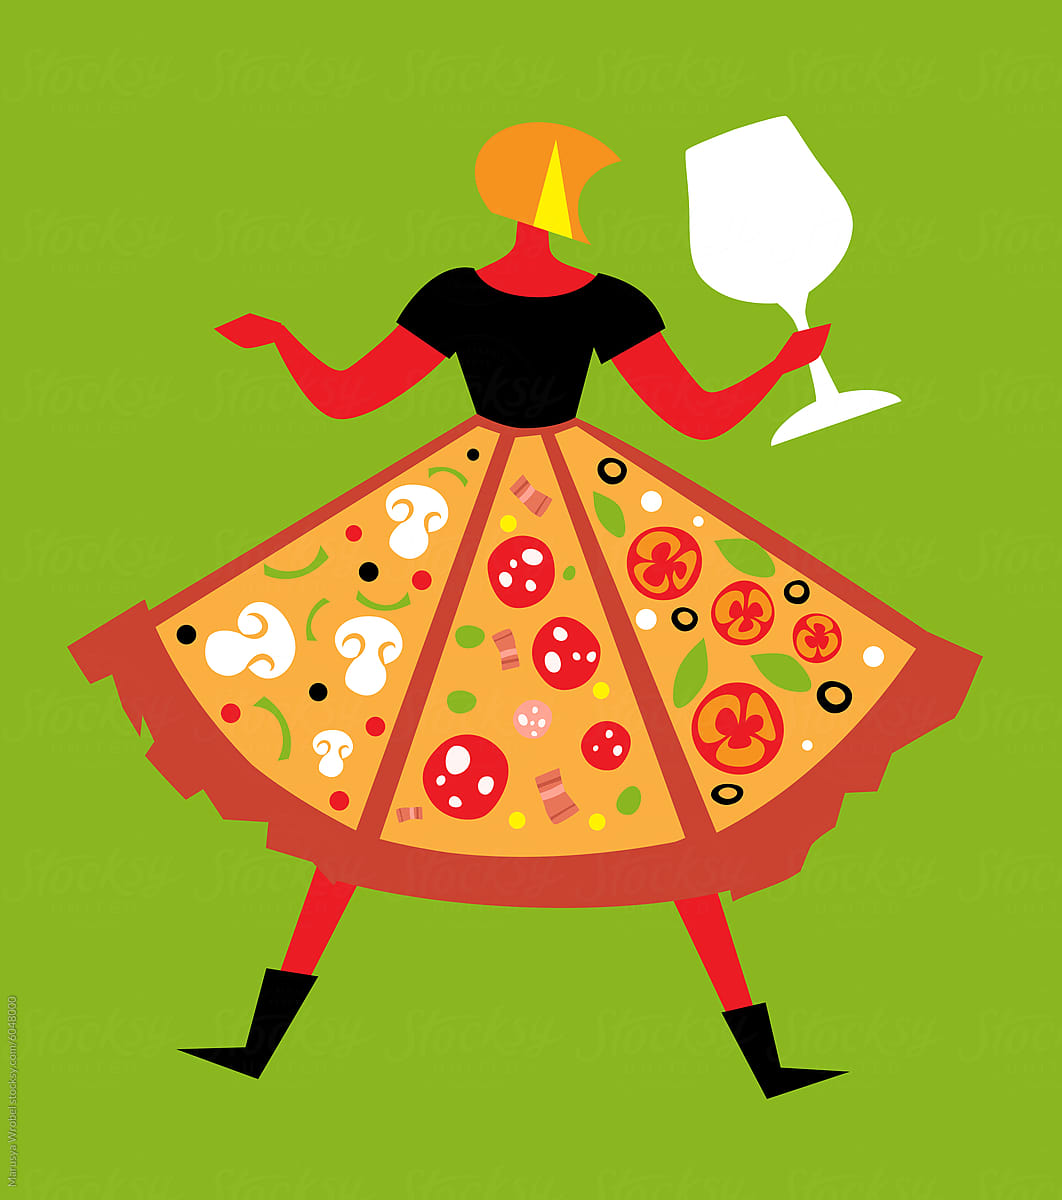 Woman in Whimsical Pizza Dress Design With Wine Glass Accessory